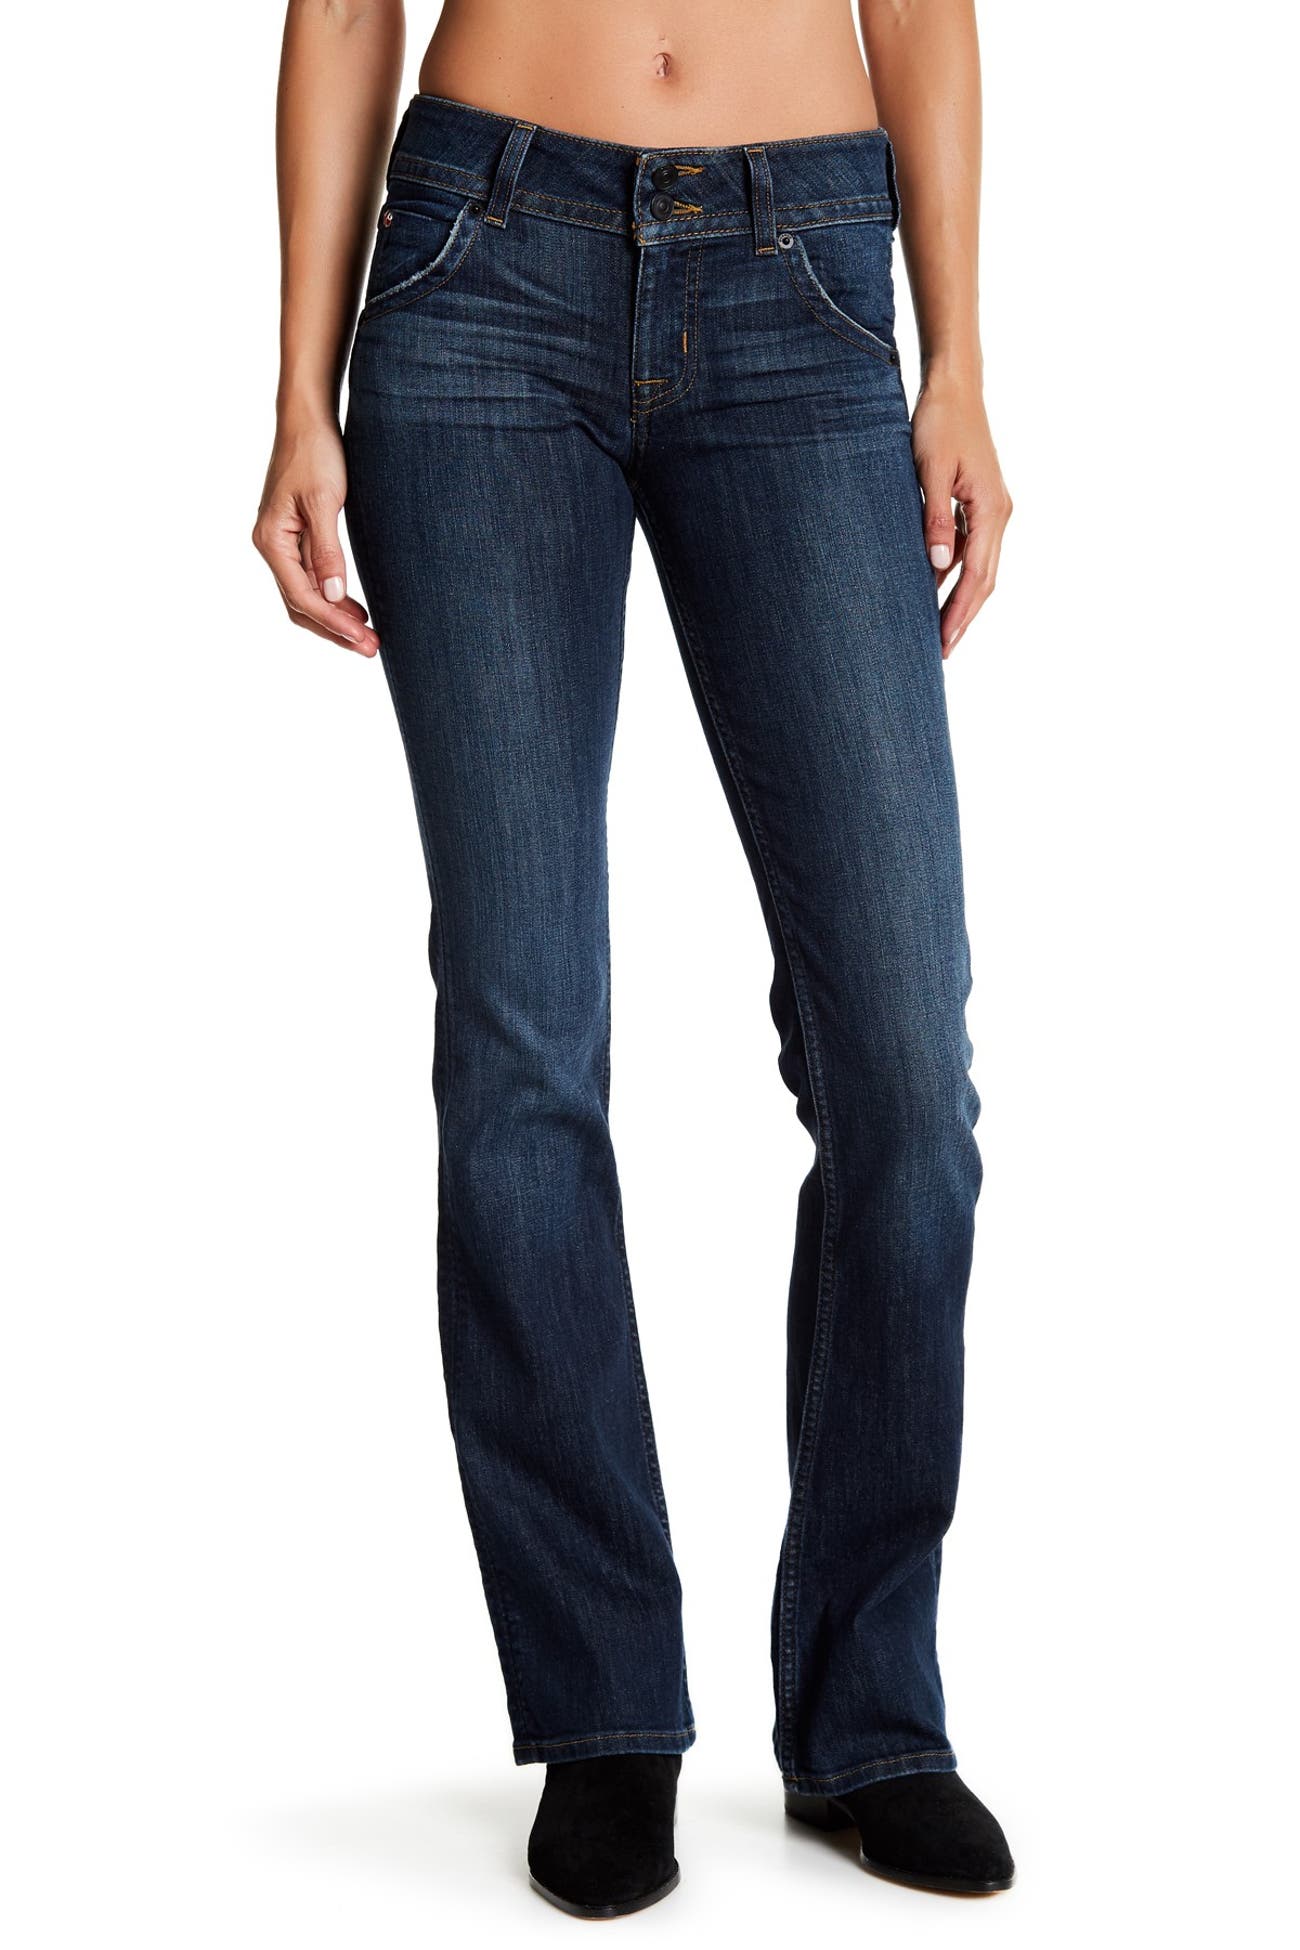 HUDSON Jeans | Signature Bootcut Mid Rise Jeans | Nordstrom Rack